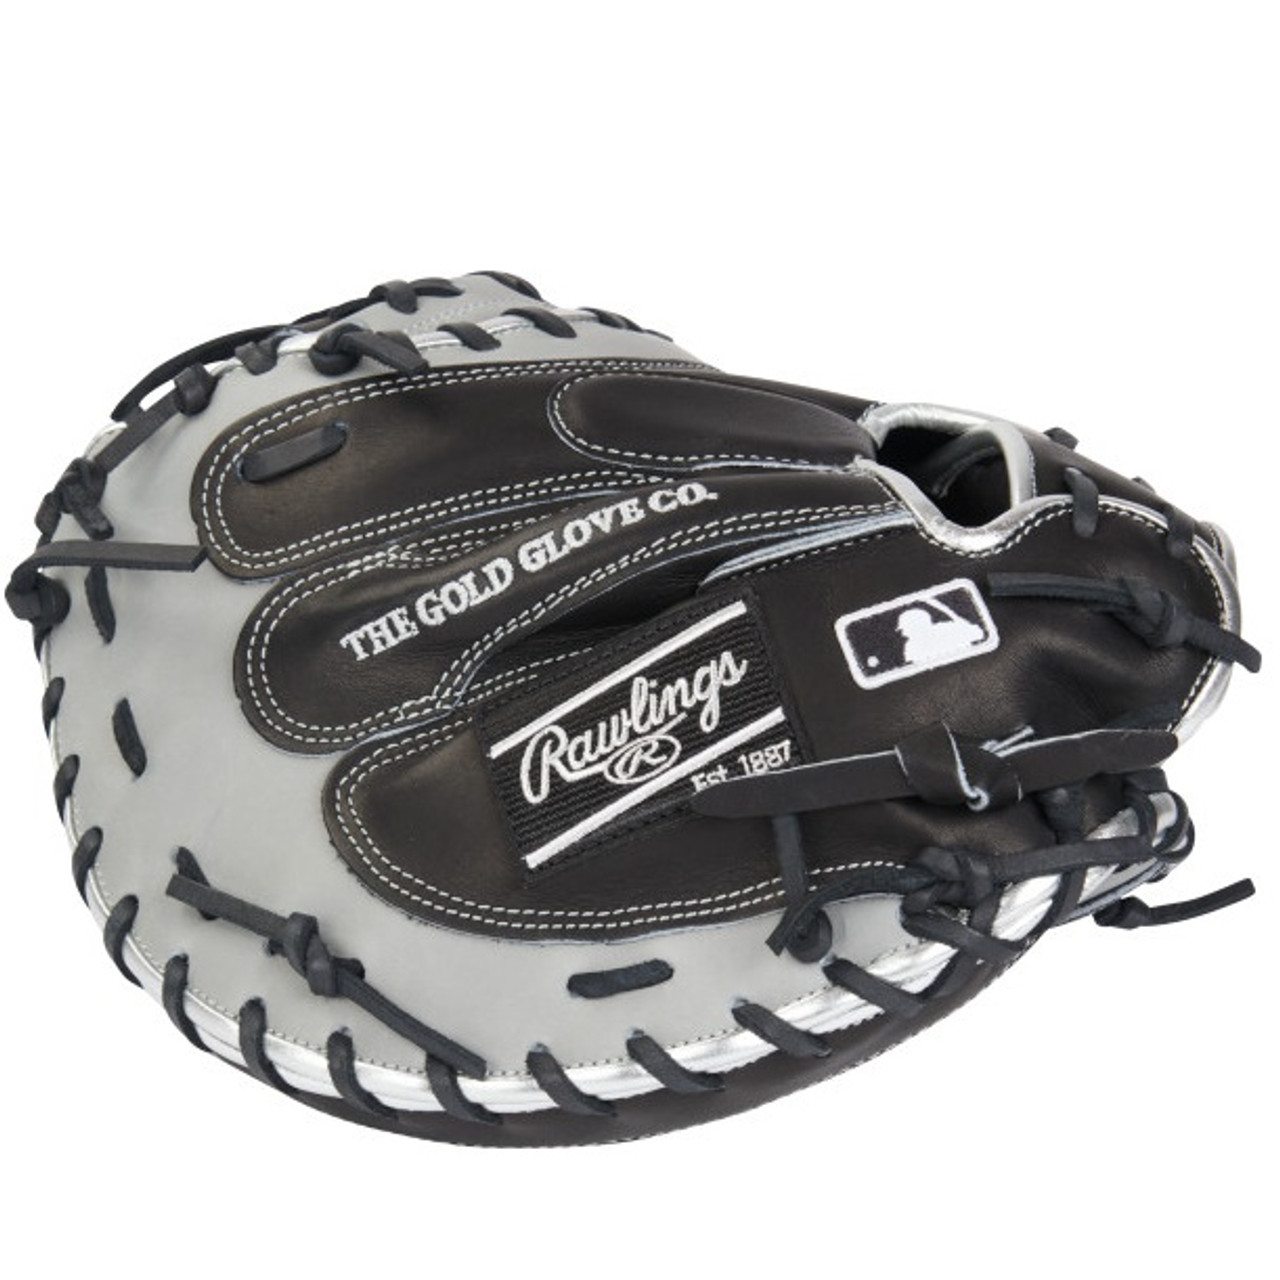 https://cdn11.bigcommerce.com/s-2hhnbofc/images/stencil/1280x1280/products/5452/23438/rawlings-color-sync-grey-ym4-4__91898.1677682356.jpg?c=2